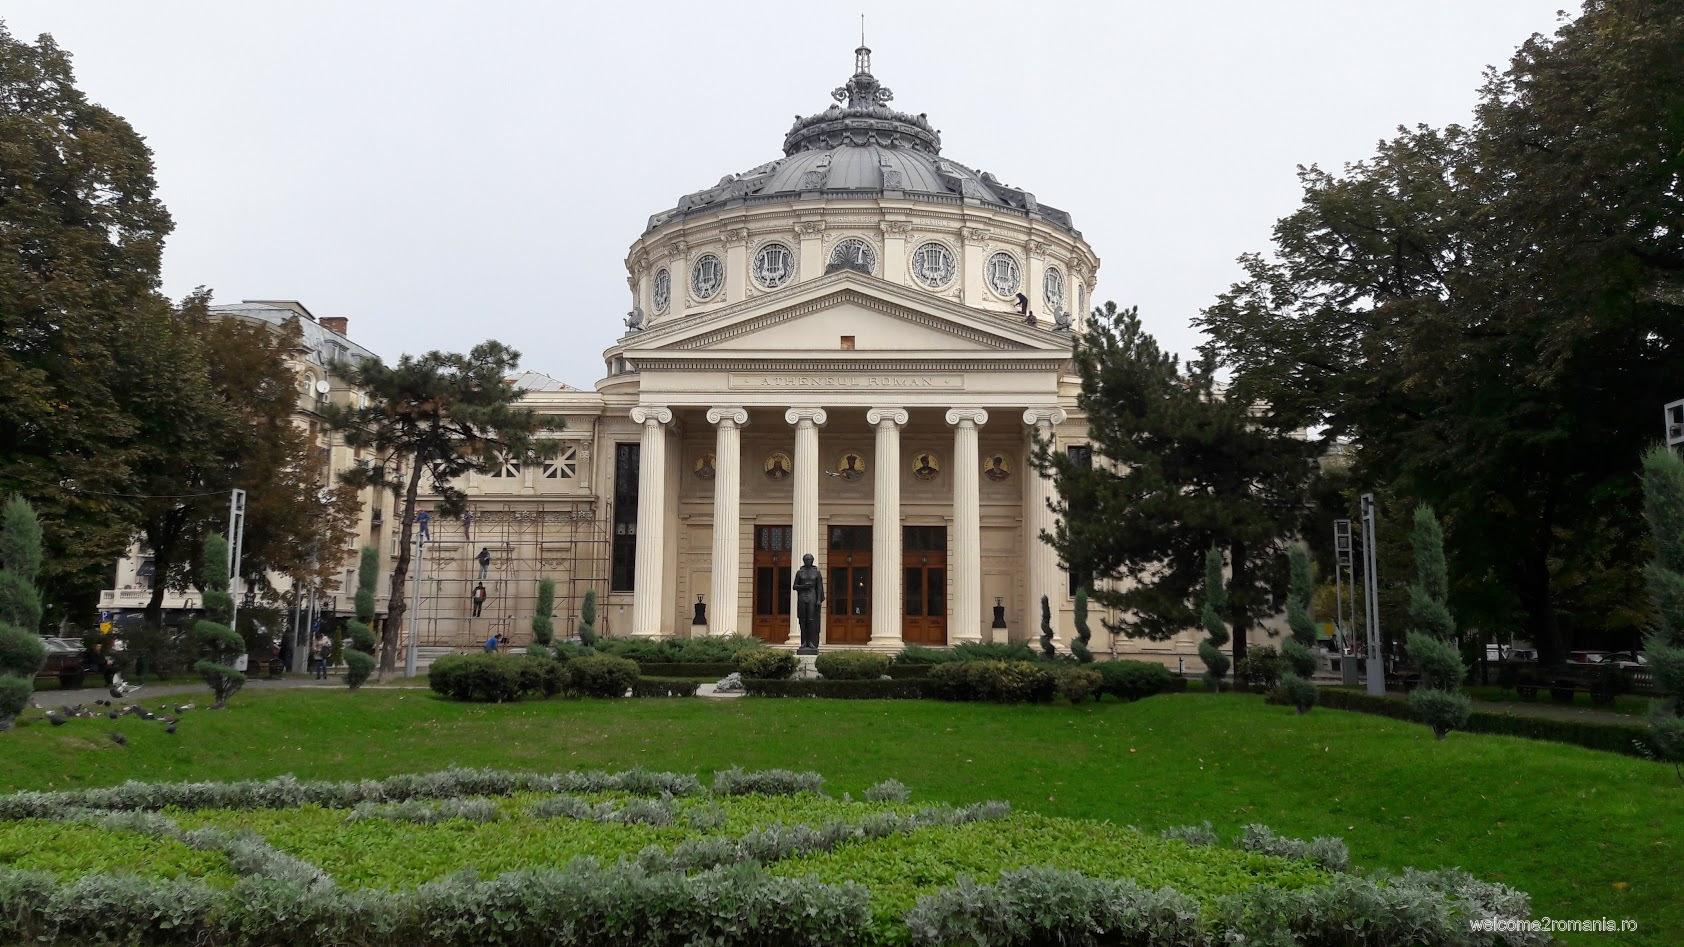 Cover image of this place Romanian Atheneum